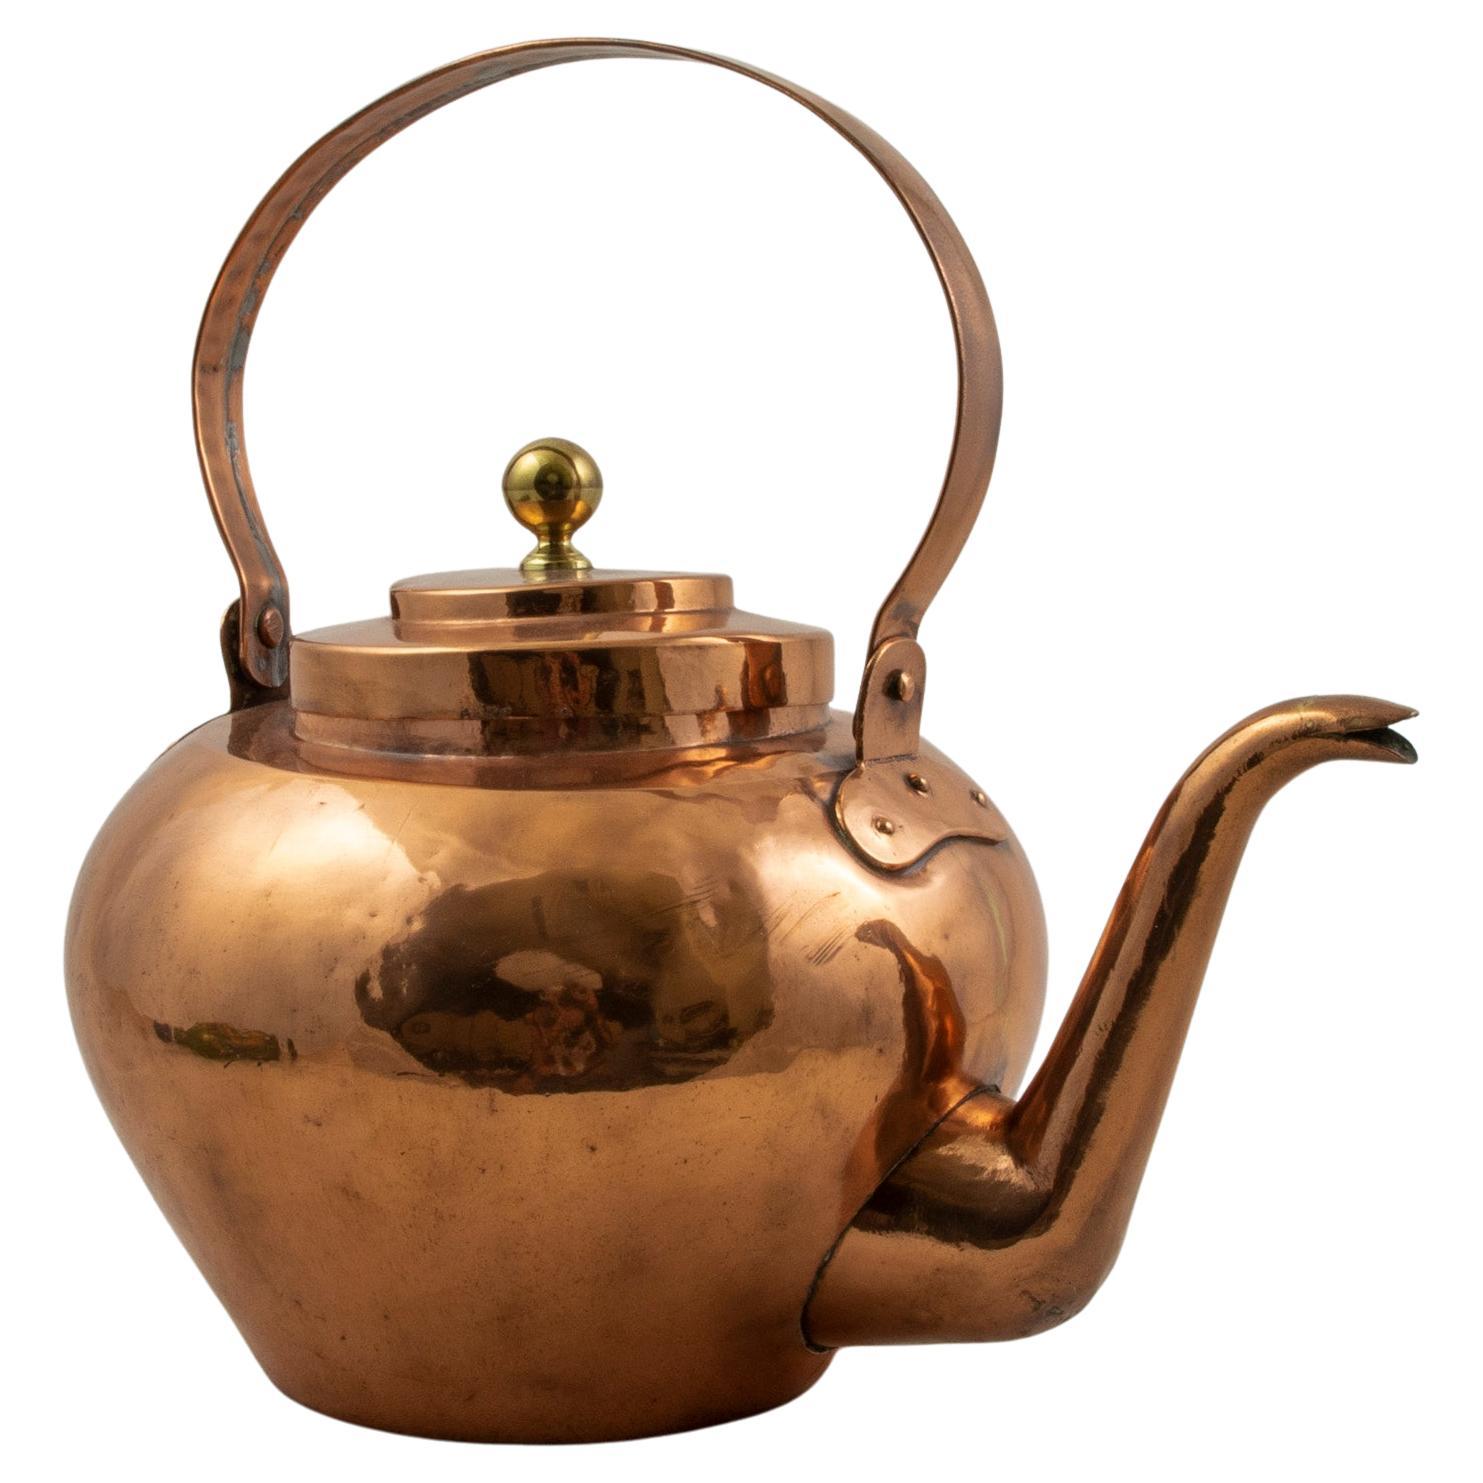 This large scale nineteenth century French copper tea kettle features a copper riveted handle and lid appointed with a brass knob. The tea kettle measures 16 inches in height by 11 inches in diameter, and measures 16 inches wide with spout. c. 1900.